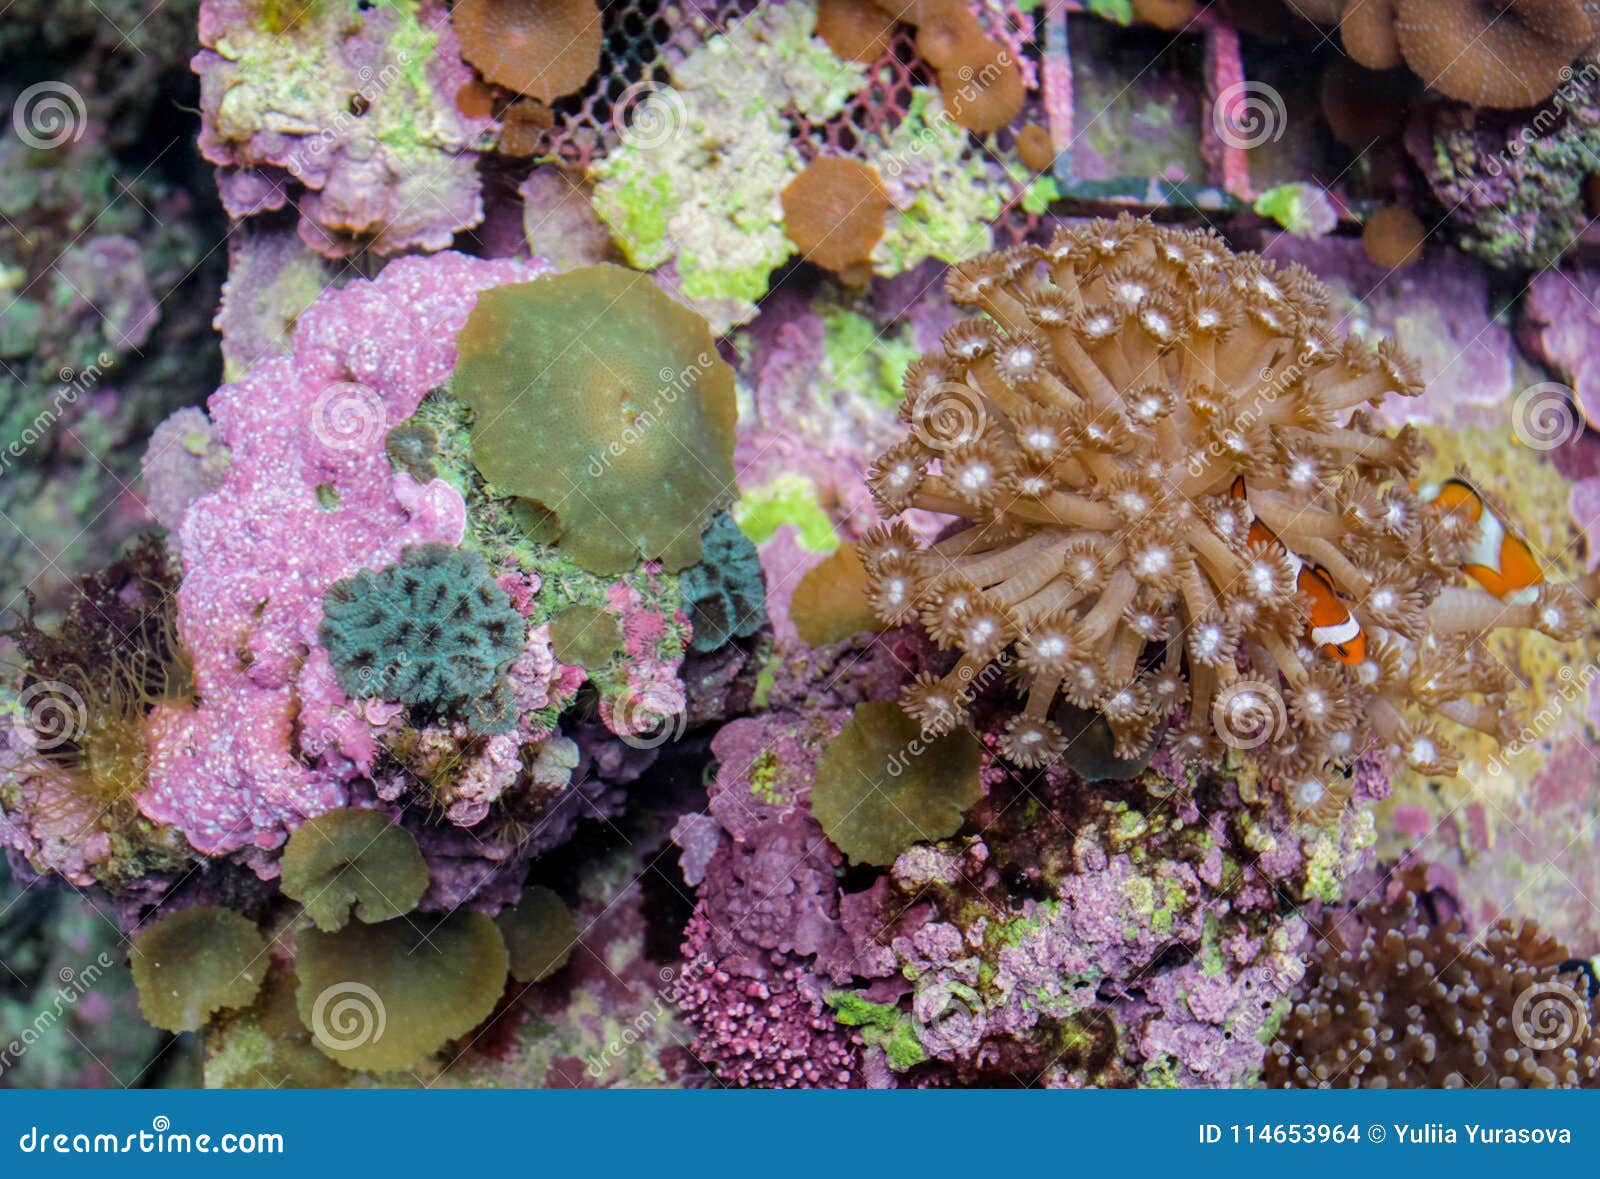 Underwater Sea and Ocean Wildlife Coral Reef and Fish Stock Photo ...